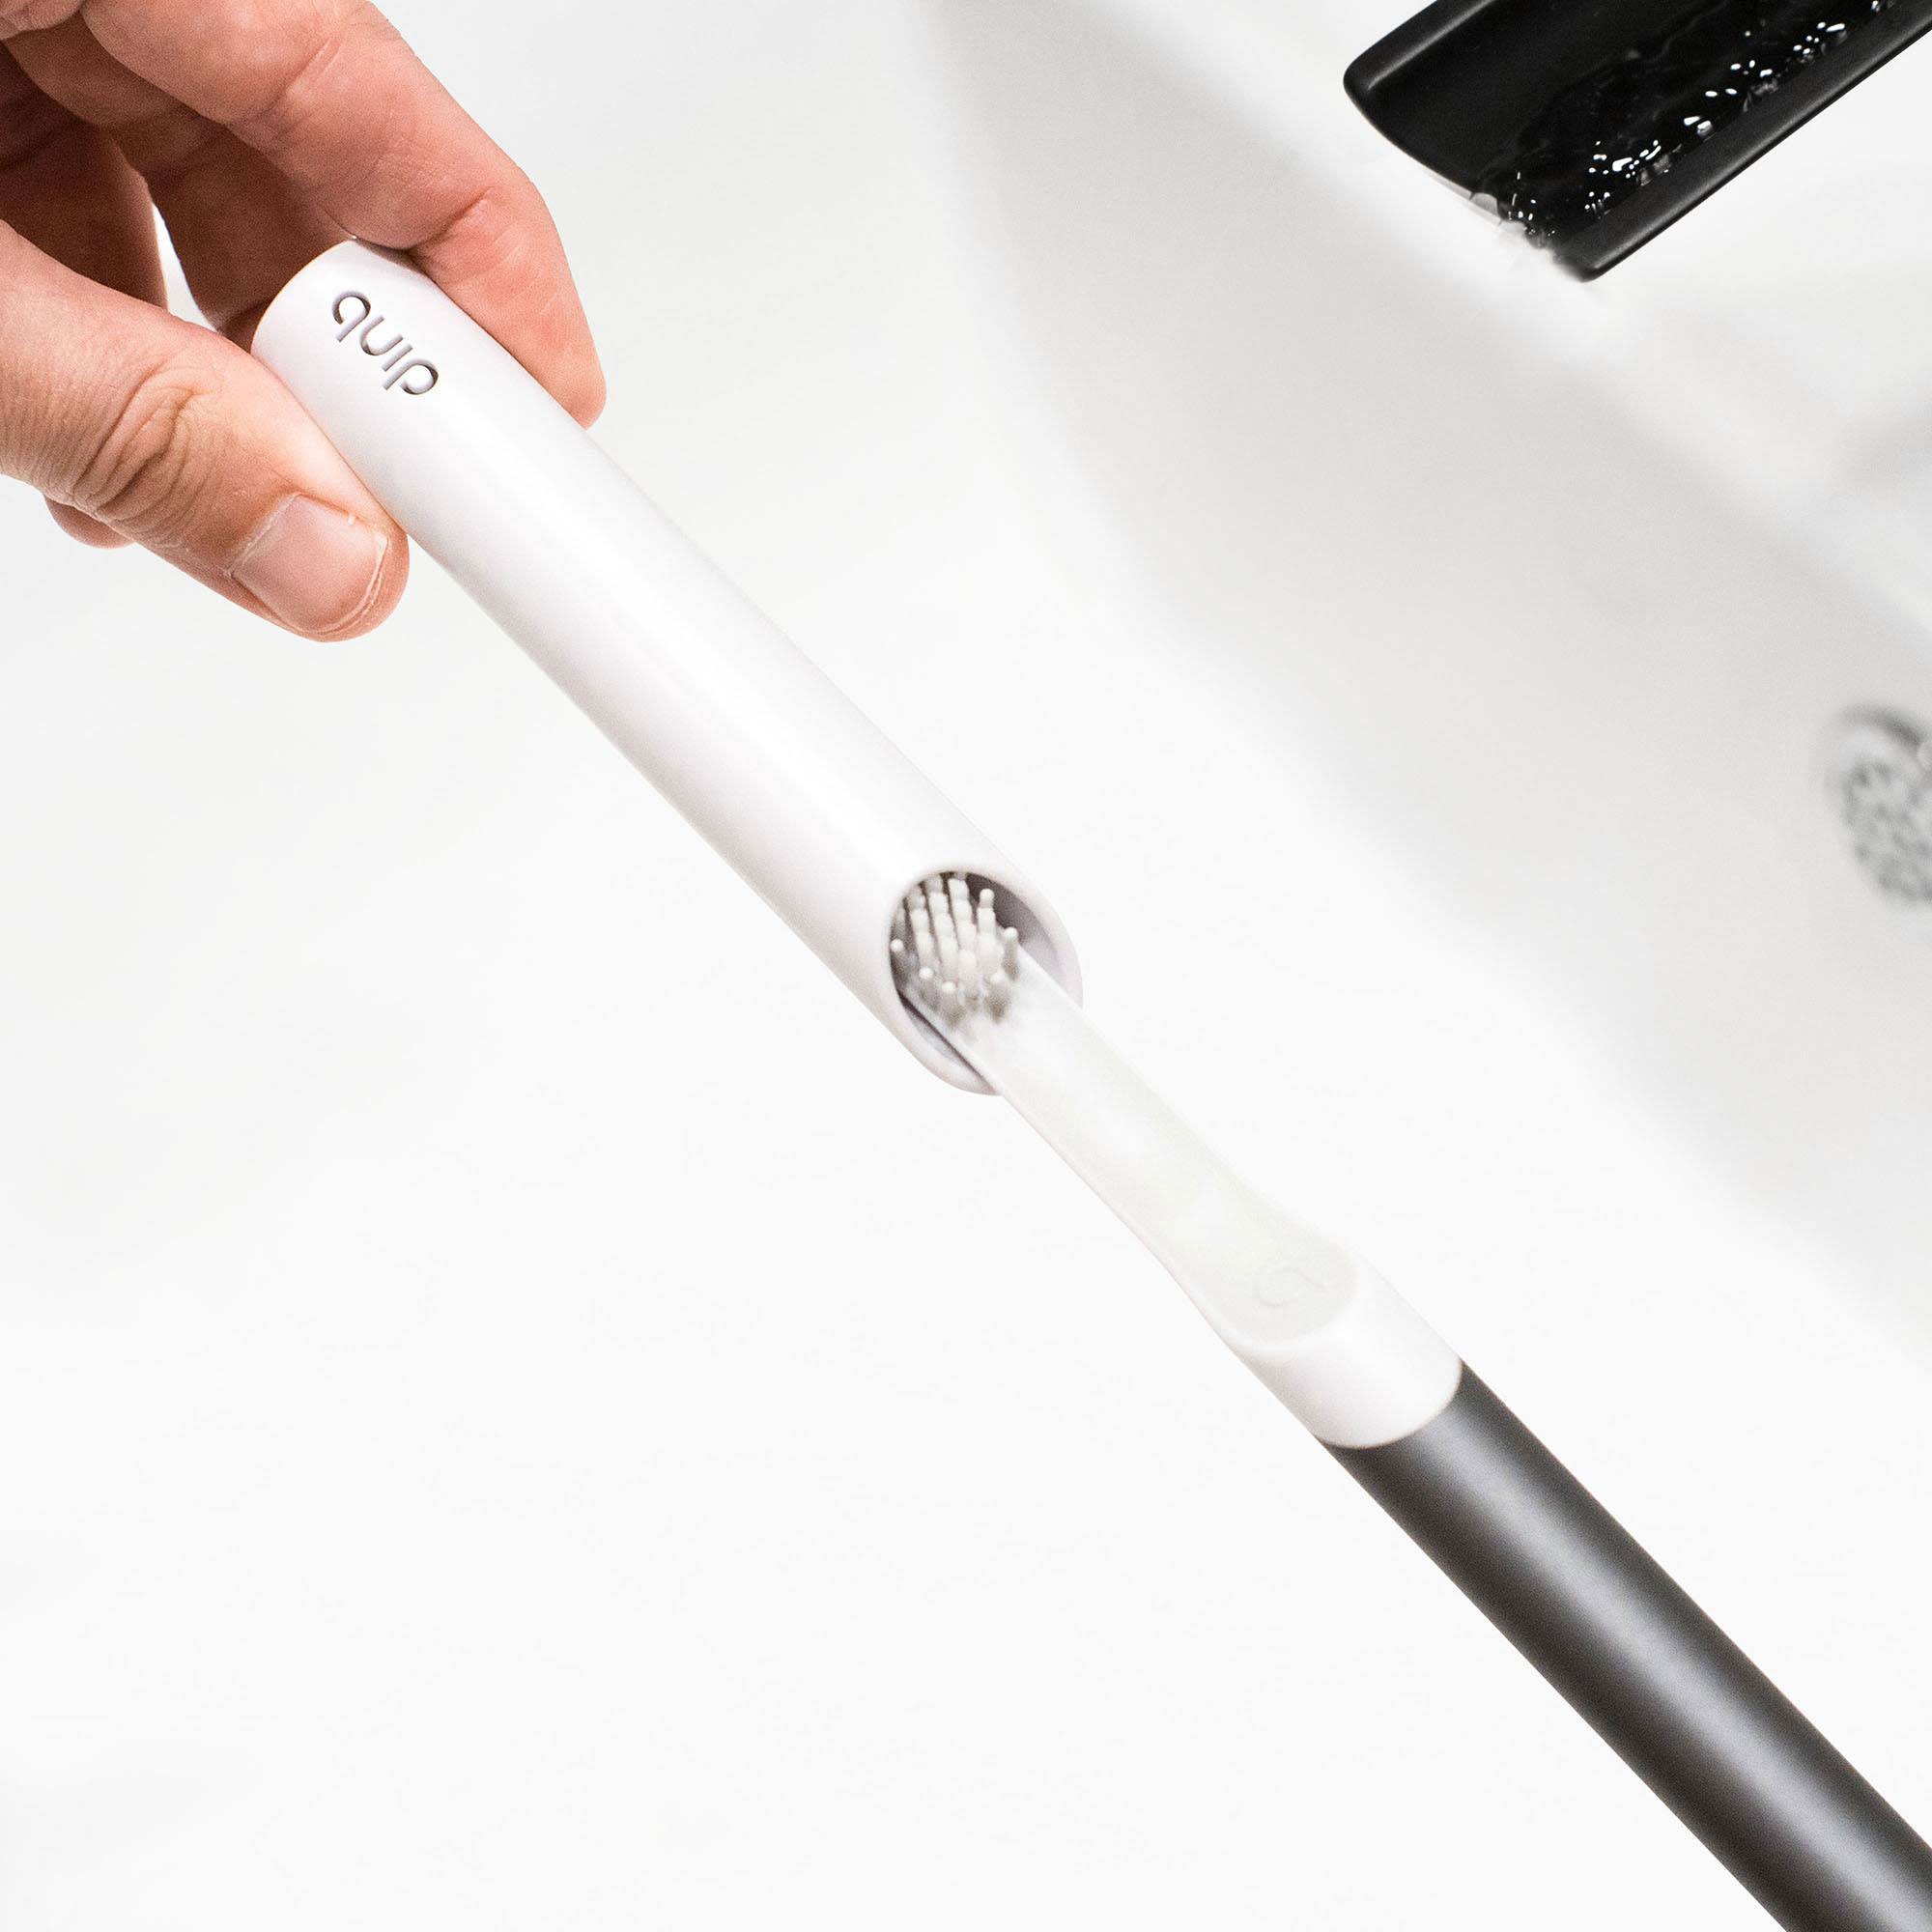 What is quip electrict toothbrush